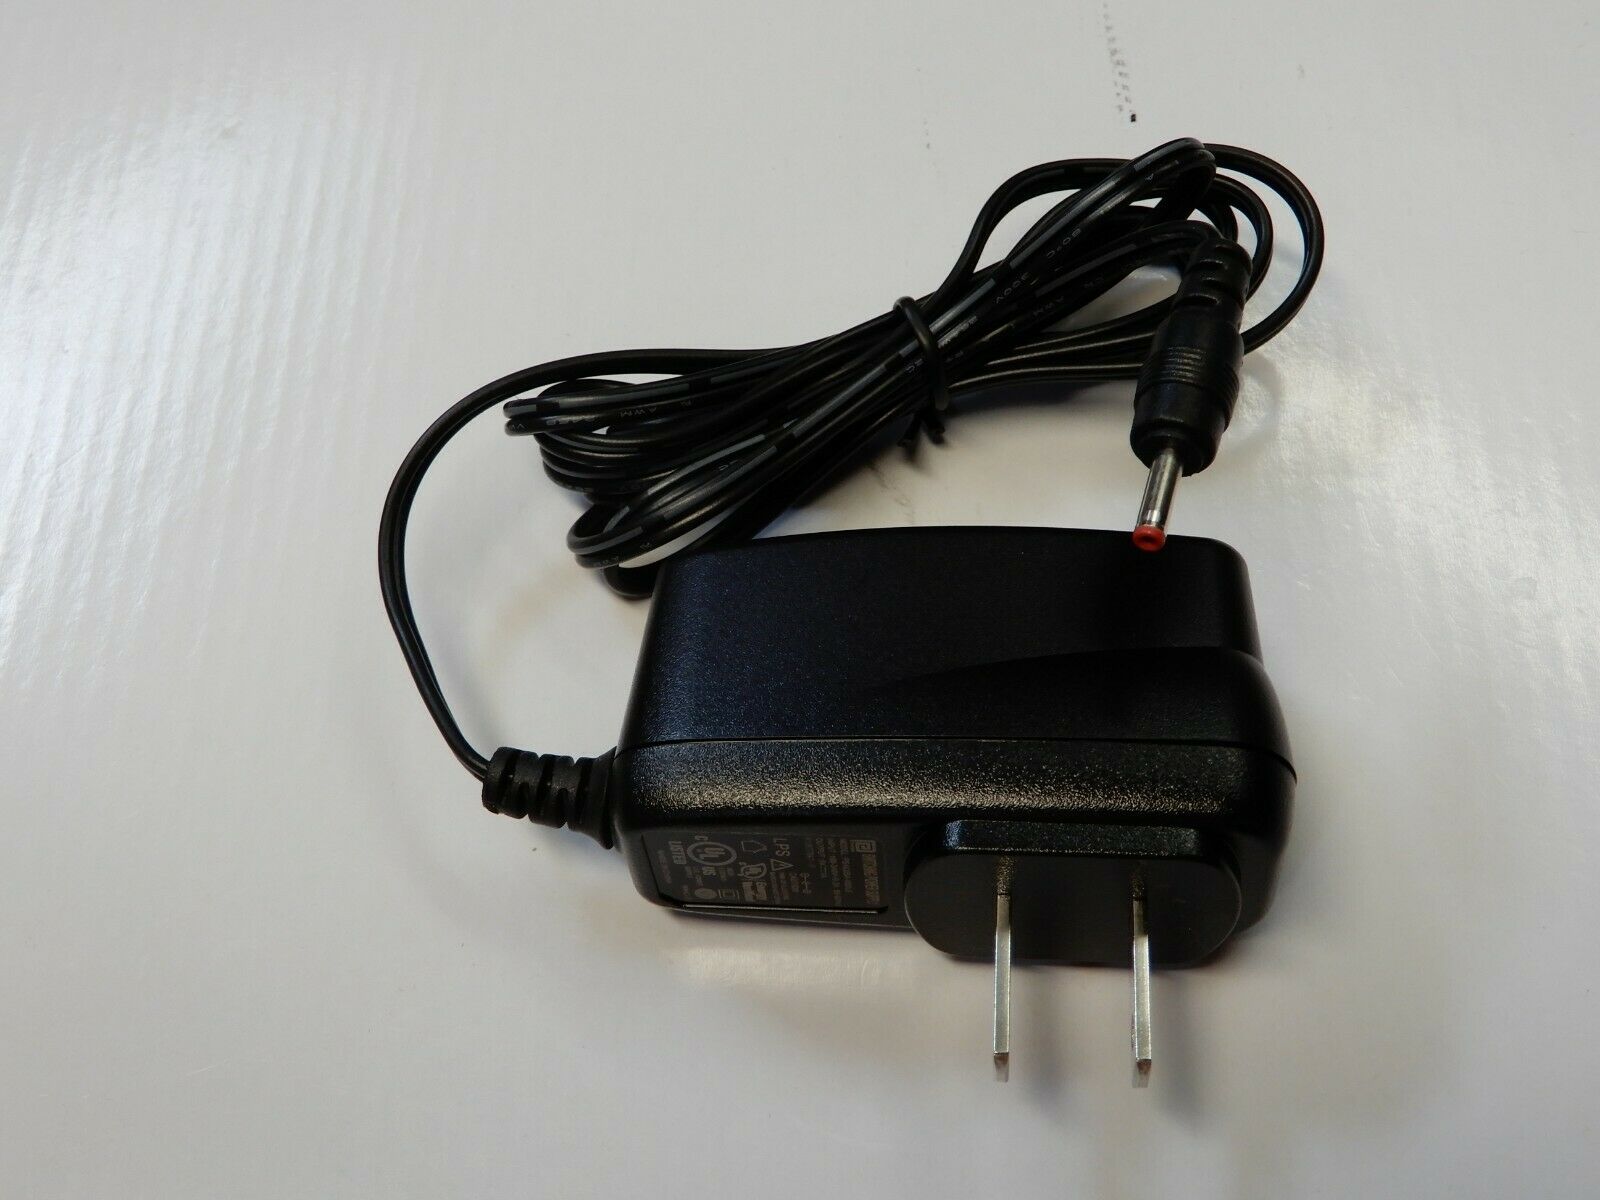 NEW Phihong PSAC05A-050 5V 1A Power Supply AC Adapter for SiriusSM Onyx SXHD1 Dock